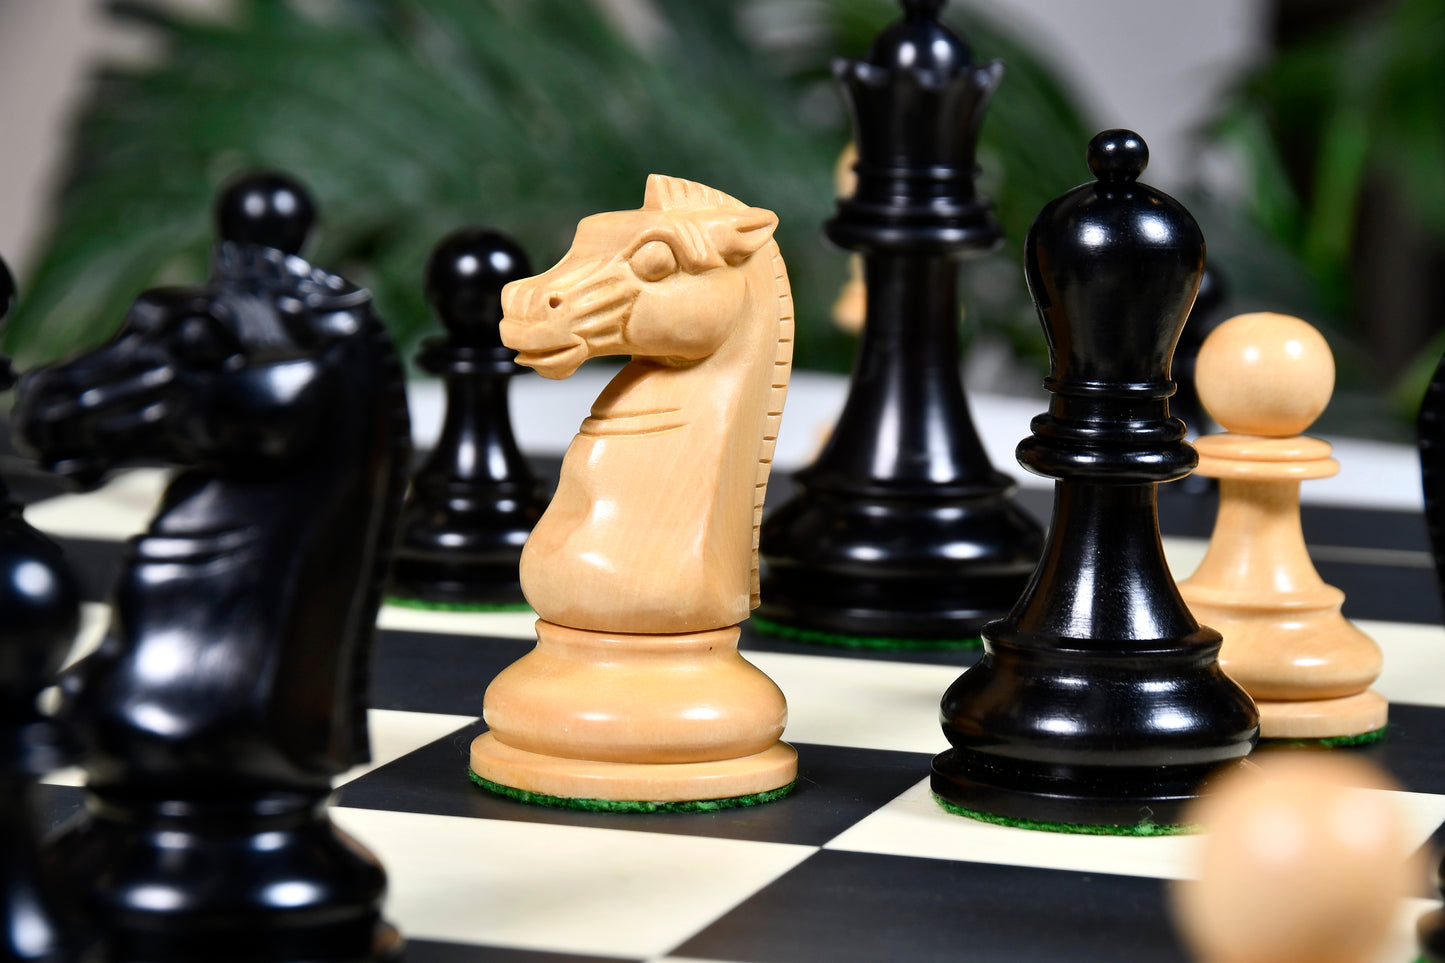 The British Chess Company (BCC) Reproduced Staunton Double Collared Chess Pieces in Ebony & Box Wood - 4.2" King